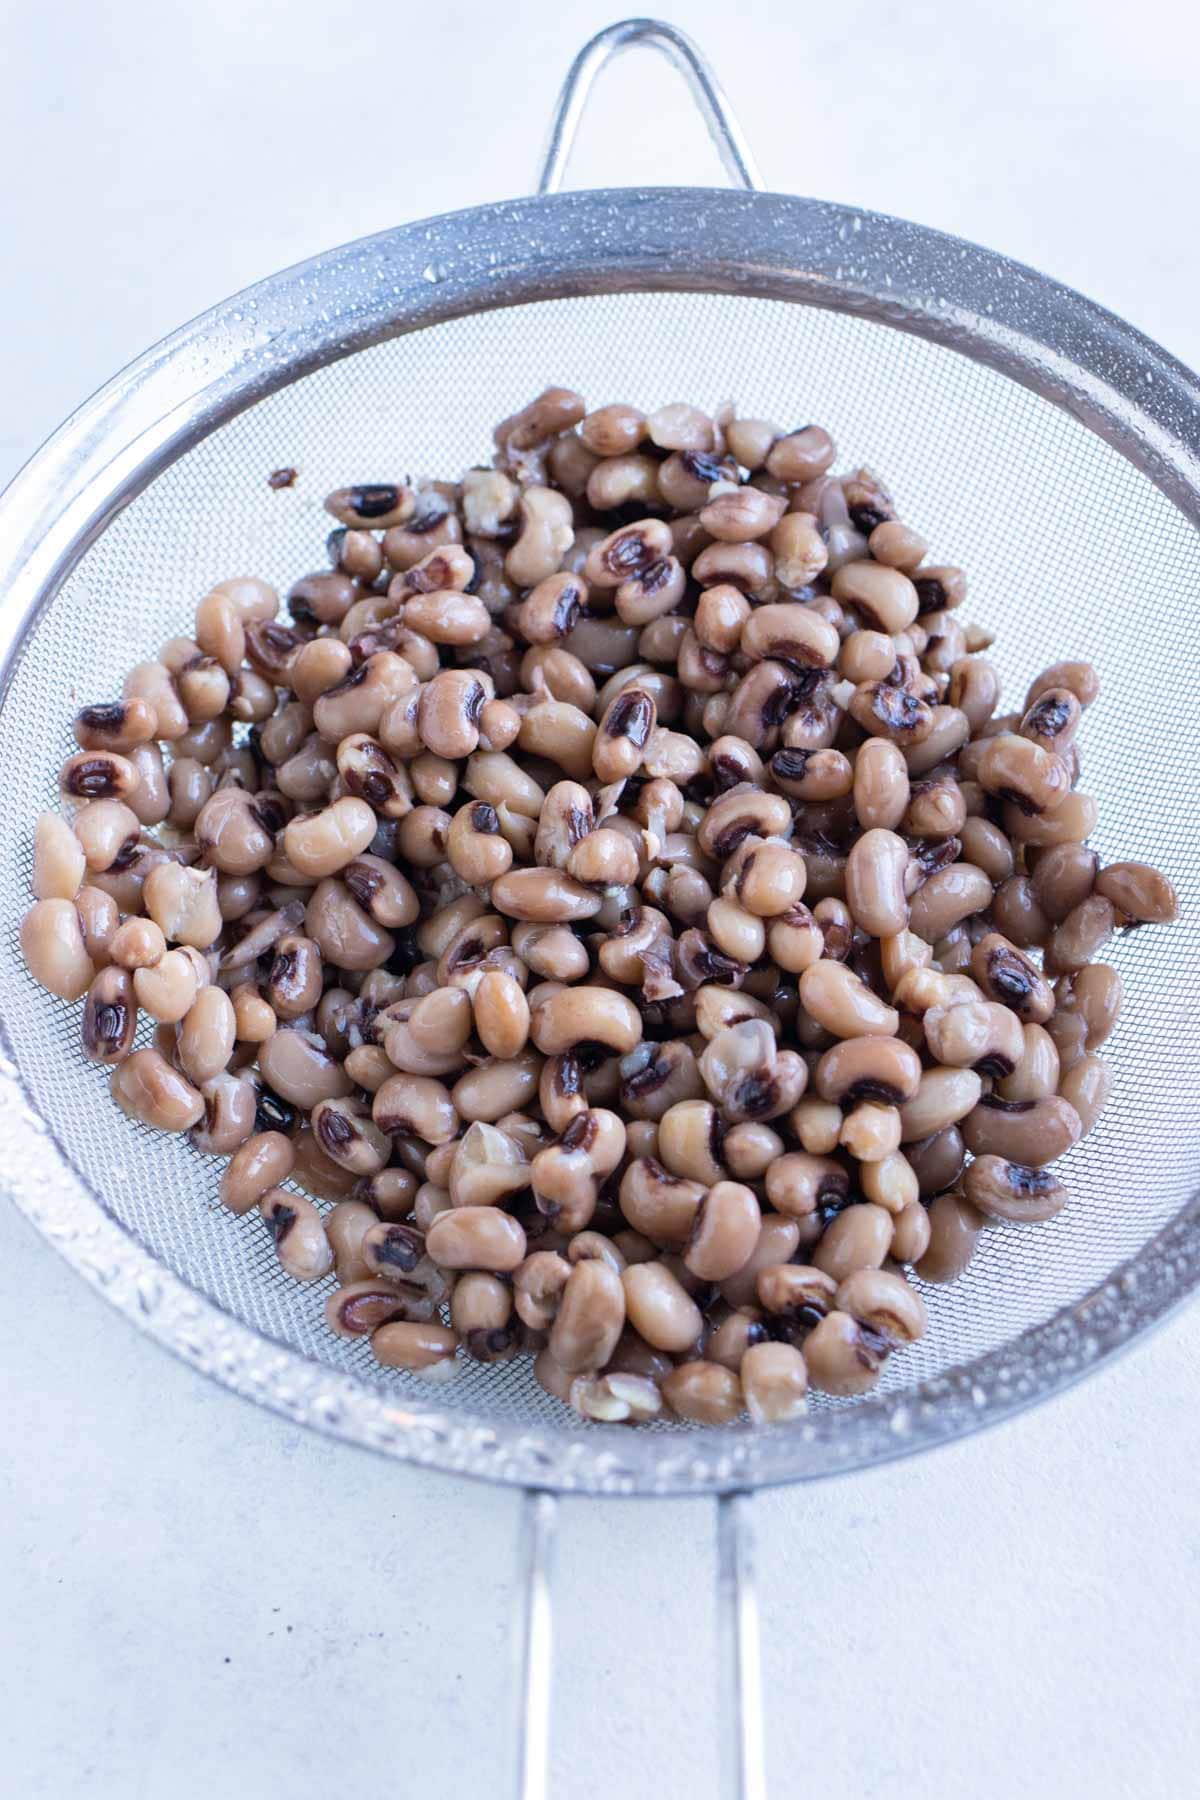 Black eyed peas are rinsed in a colander.